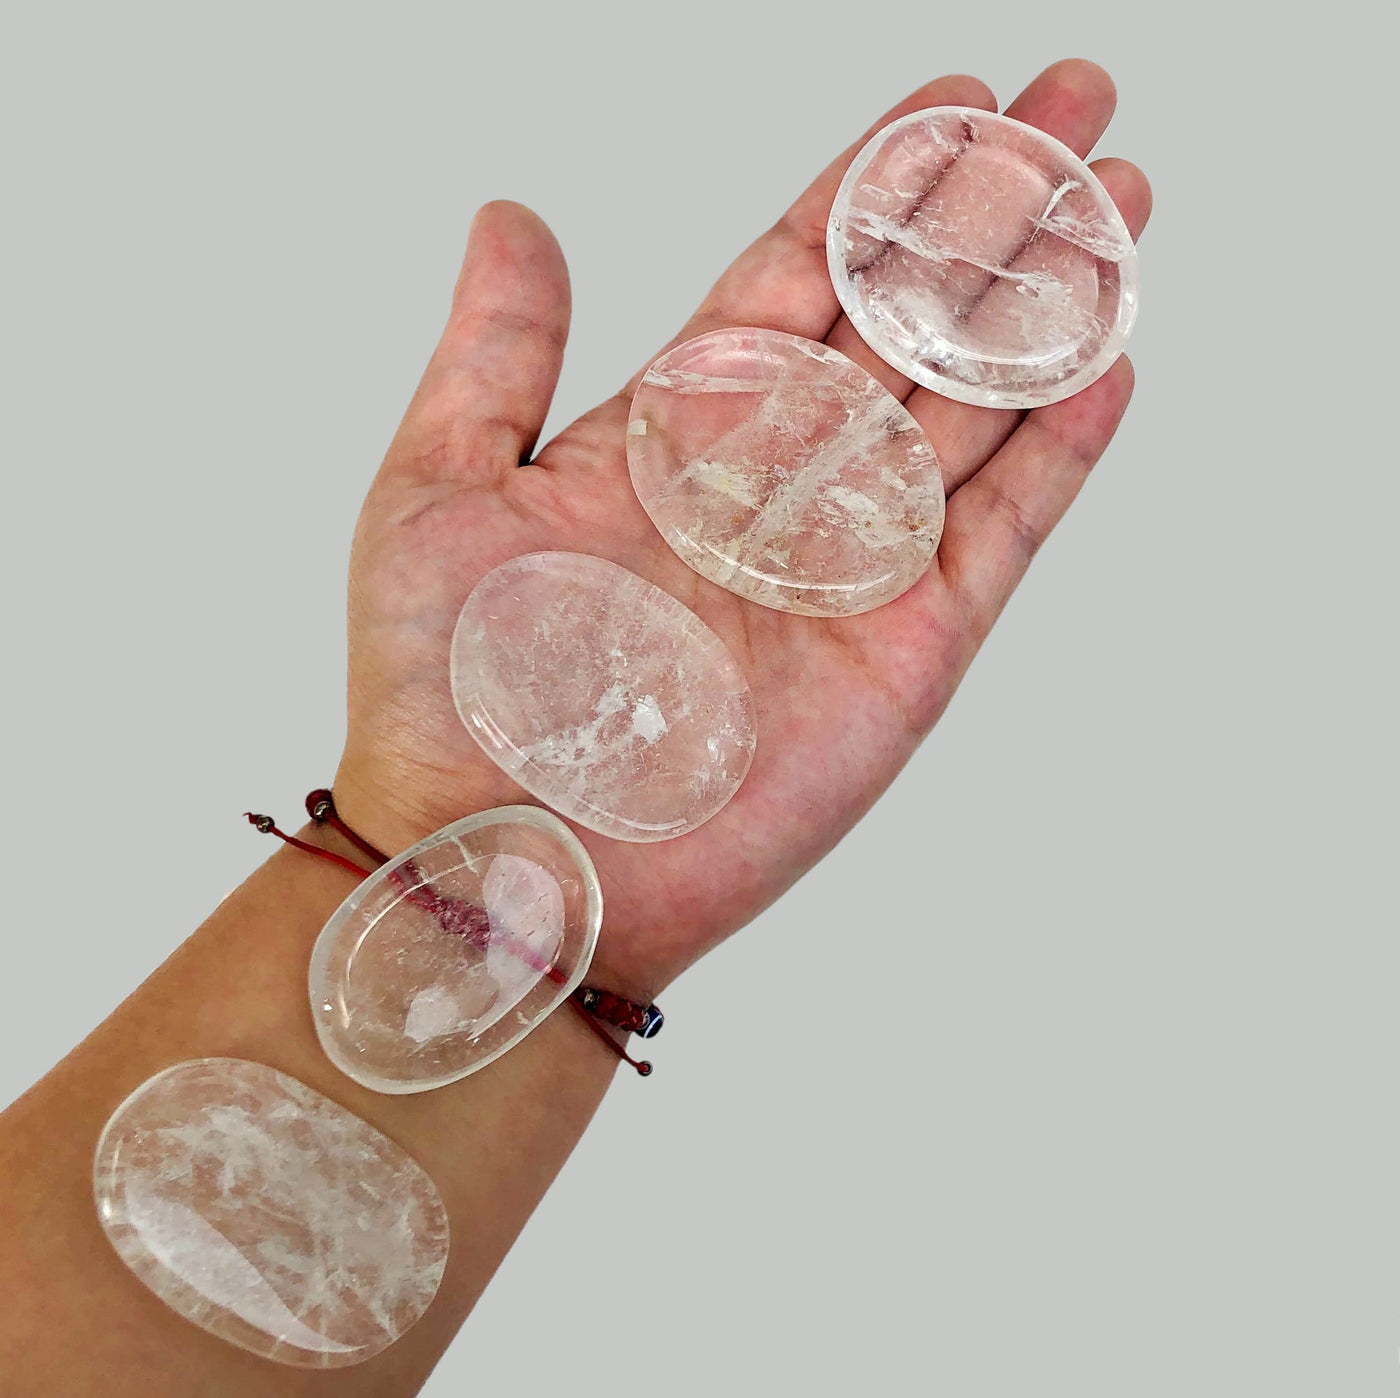 Crystal Quartz Palm Stone in hand for size reference 